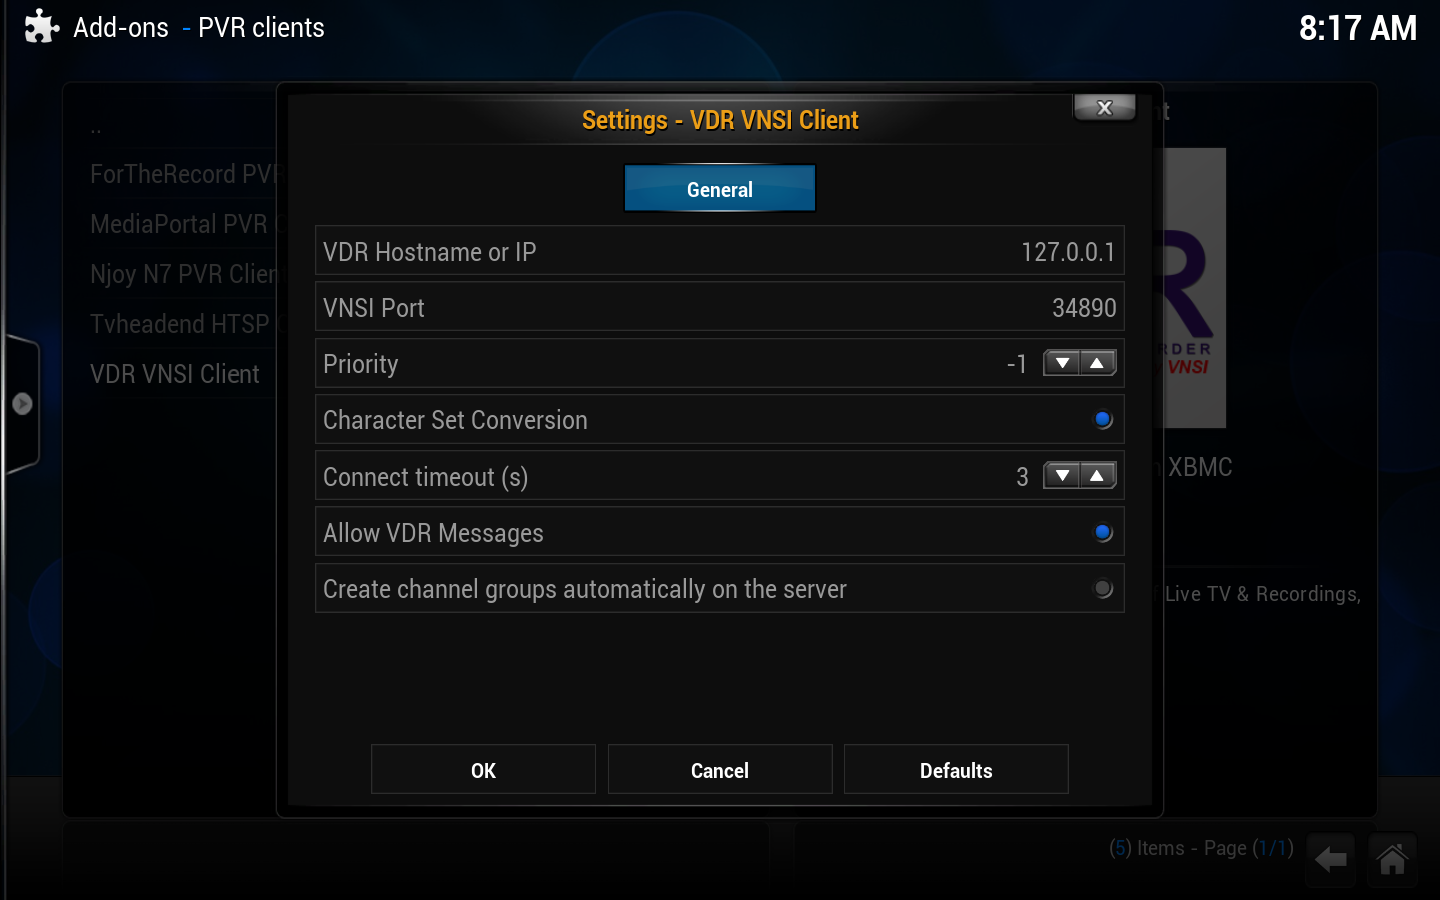 File:VDR VNSI Client.settings.png